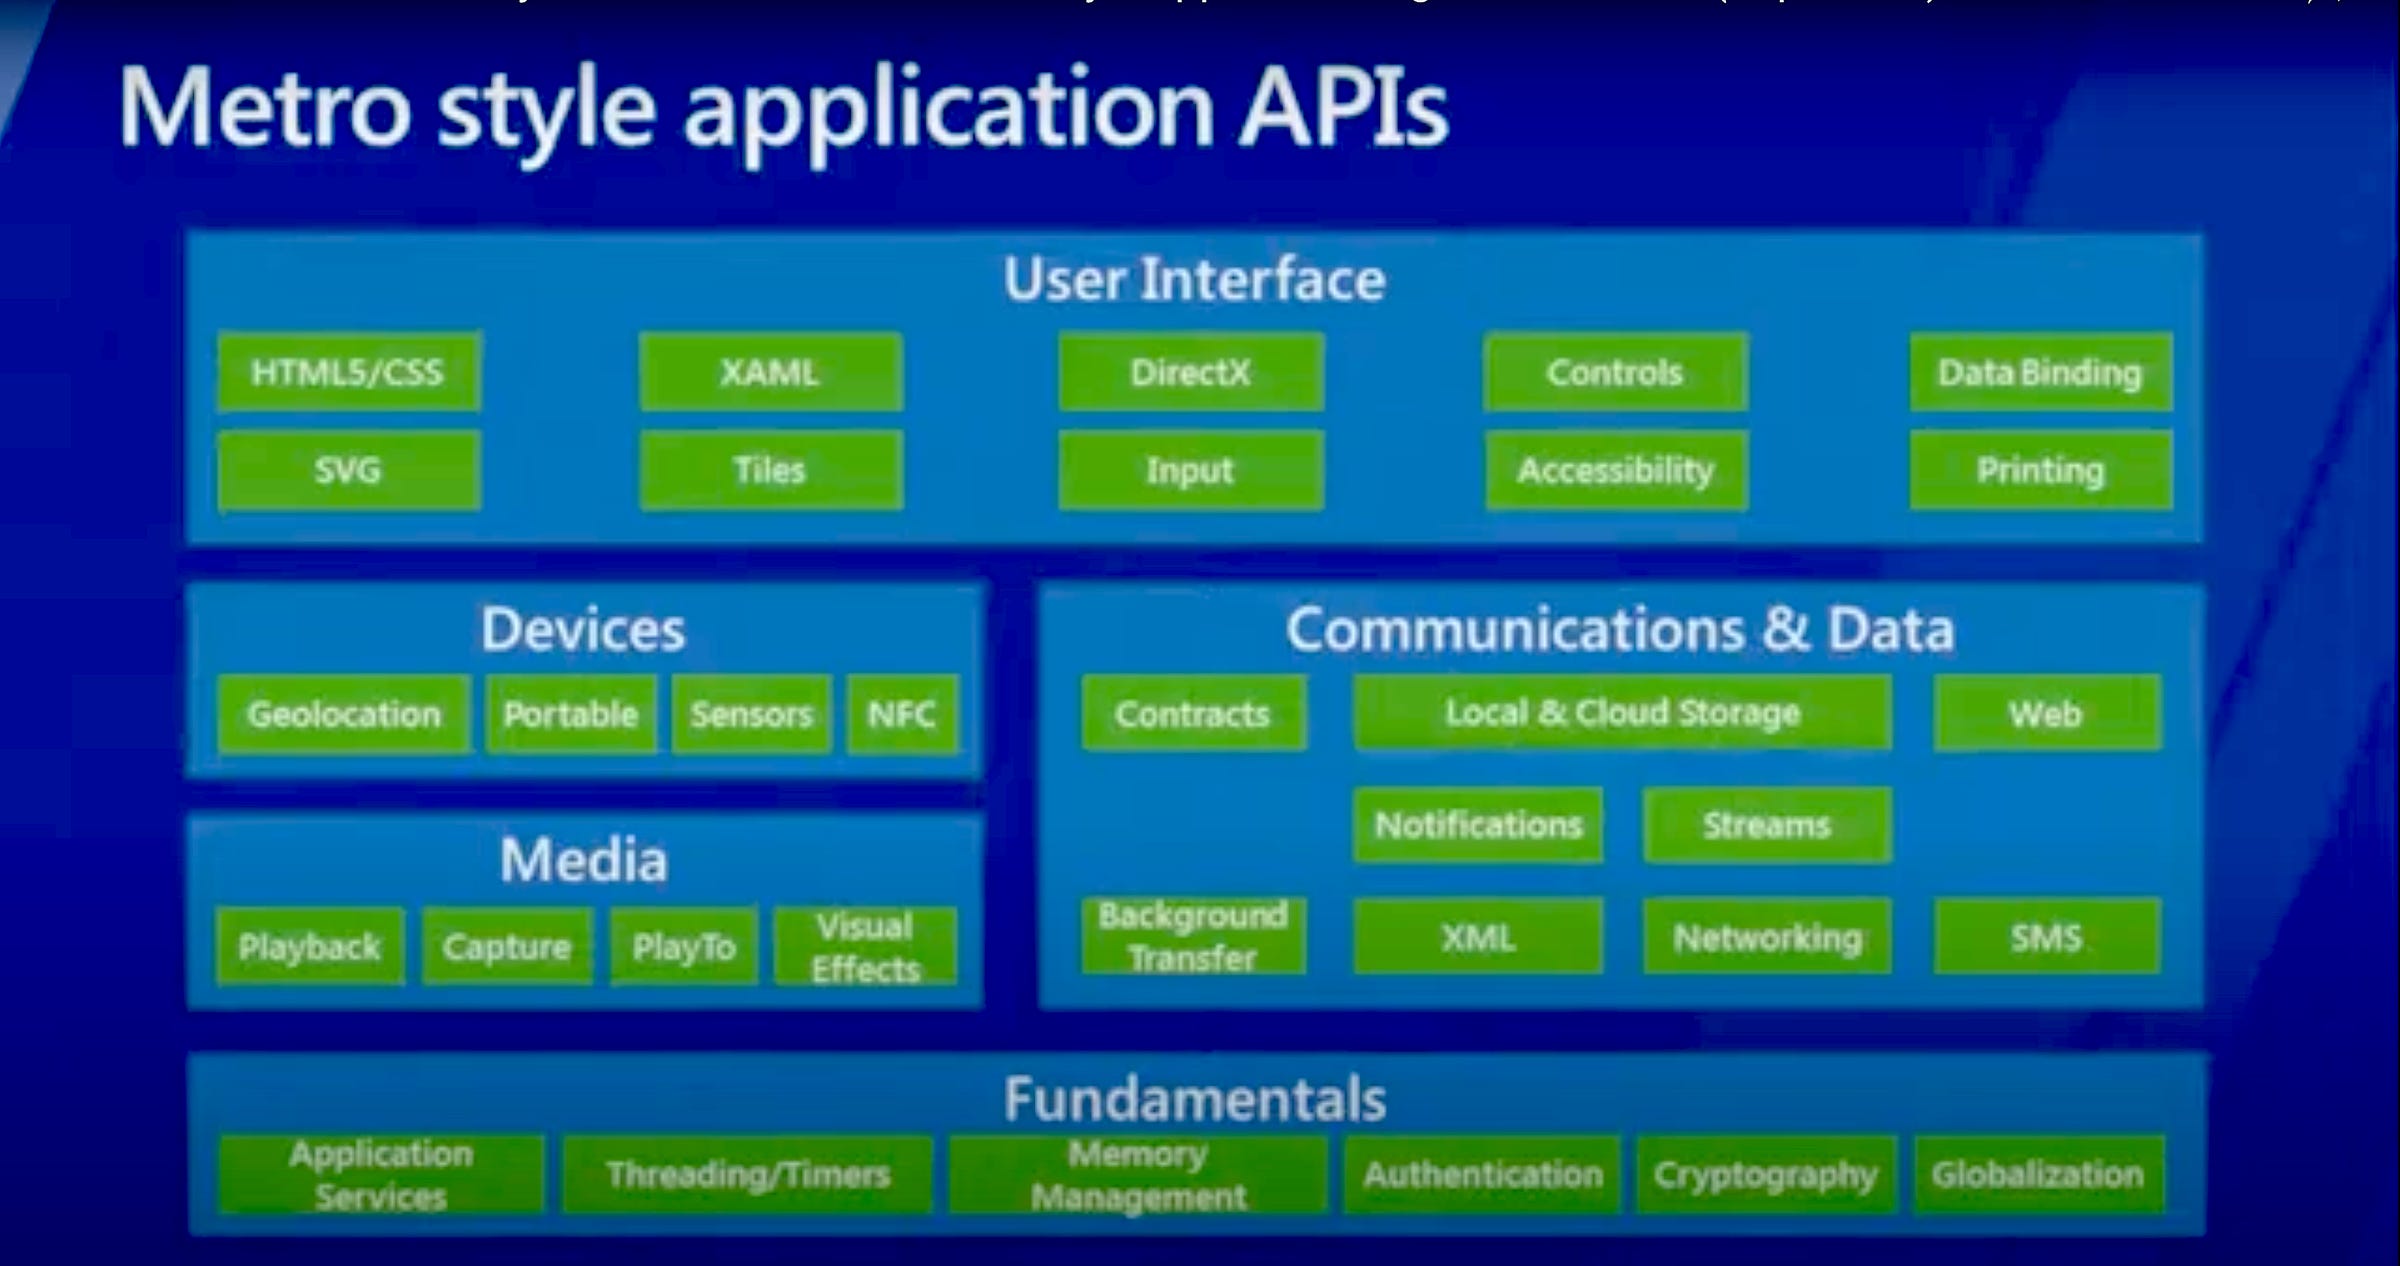 List of all the API subsystems in Metro style: fundamentals, devices, media, communications and data, user interface.